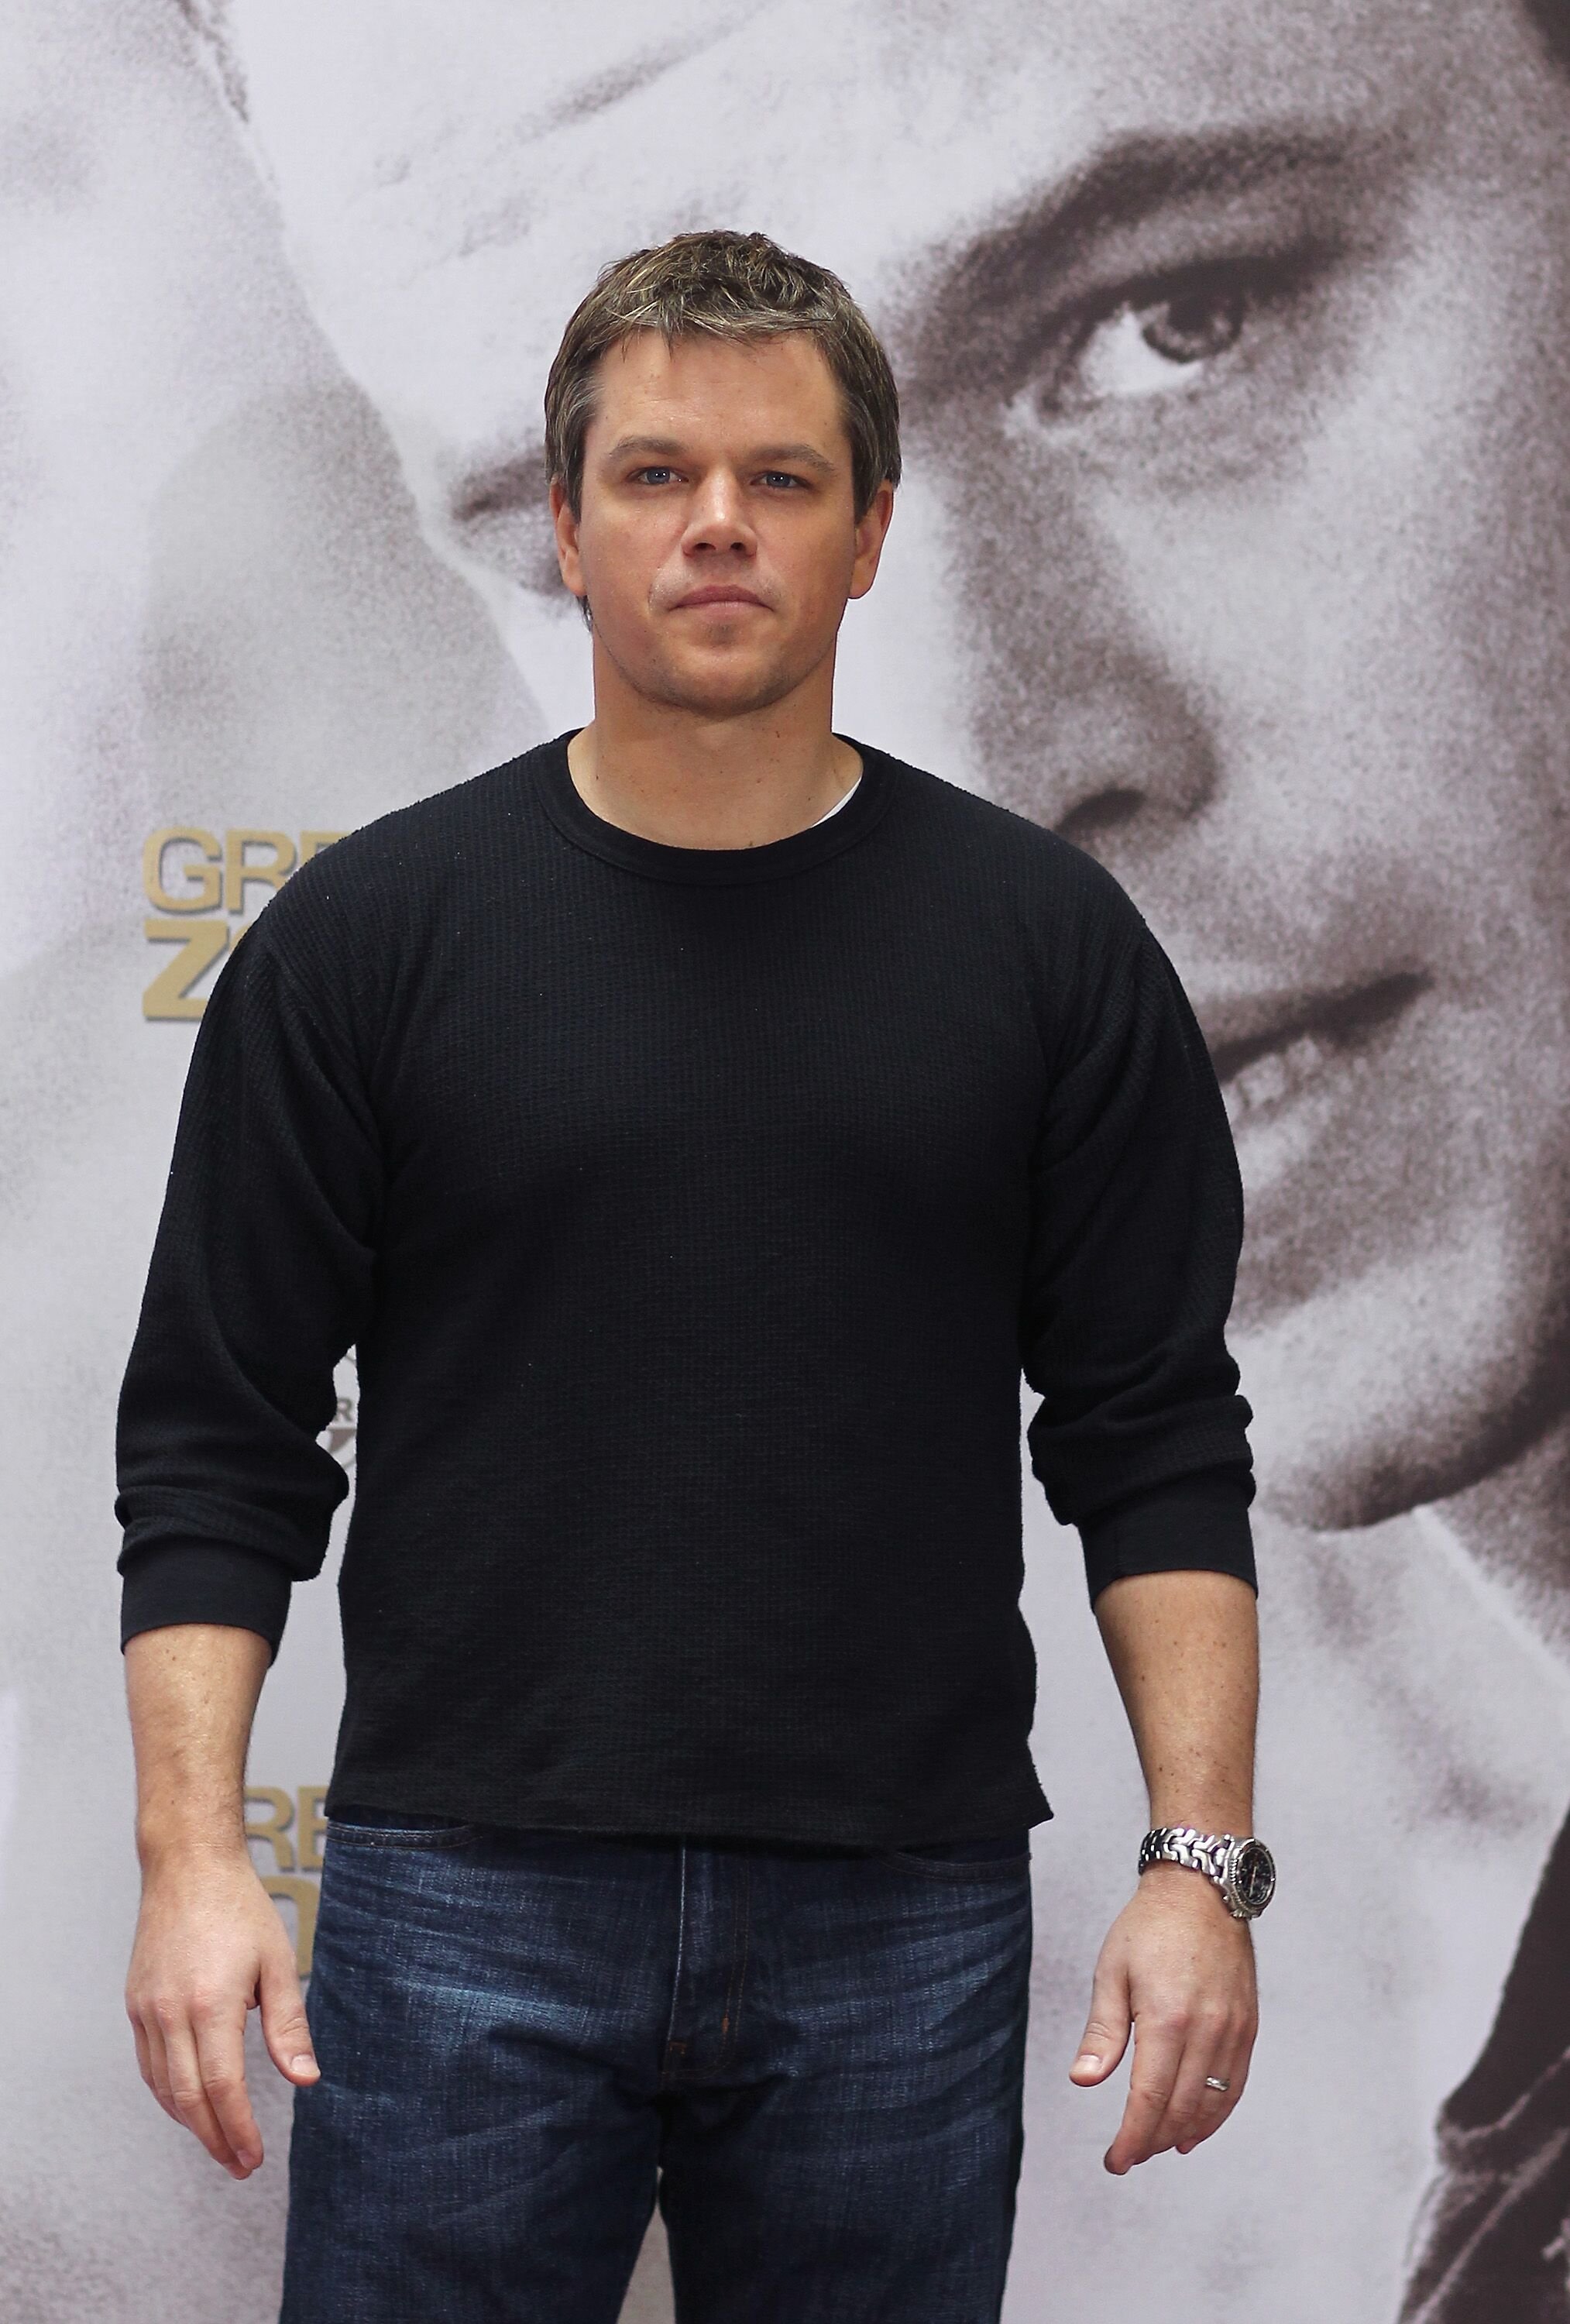 Matt Damon attends a photocall to promote the new movie. | Source: Getty Images